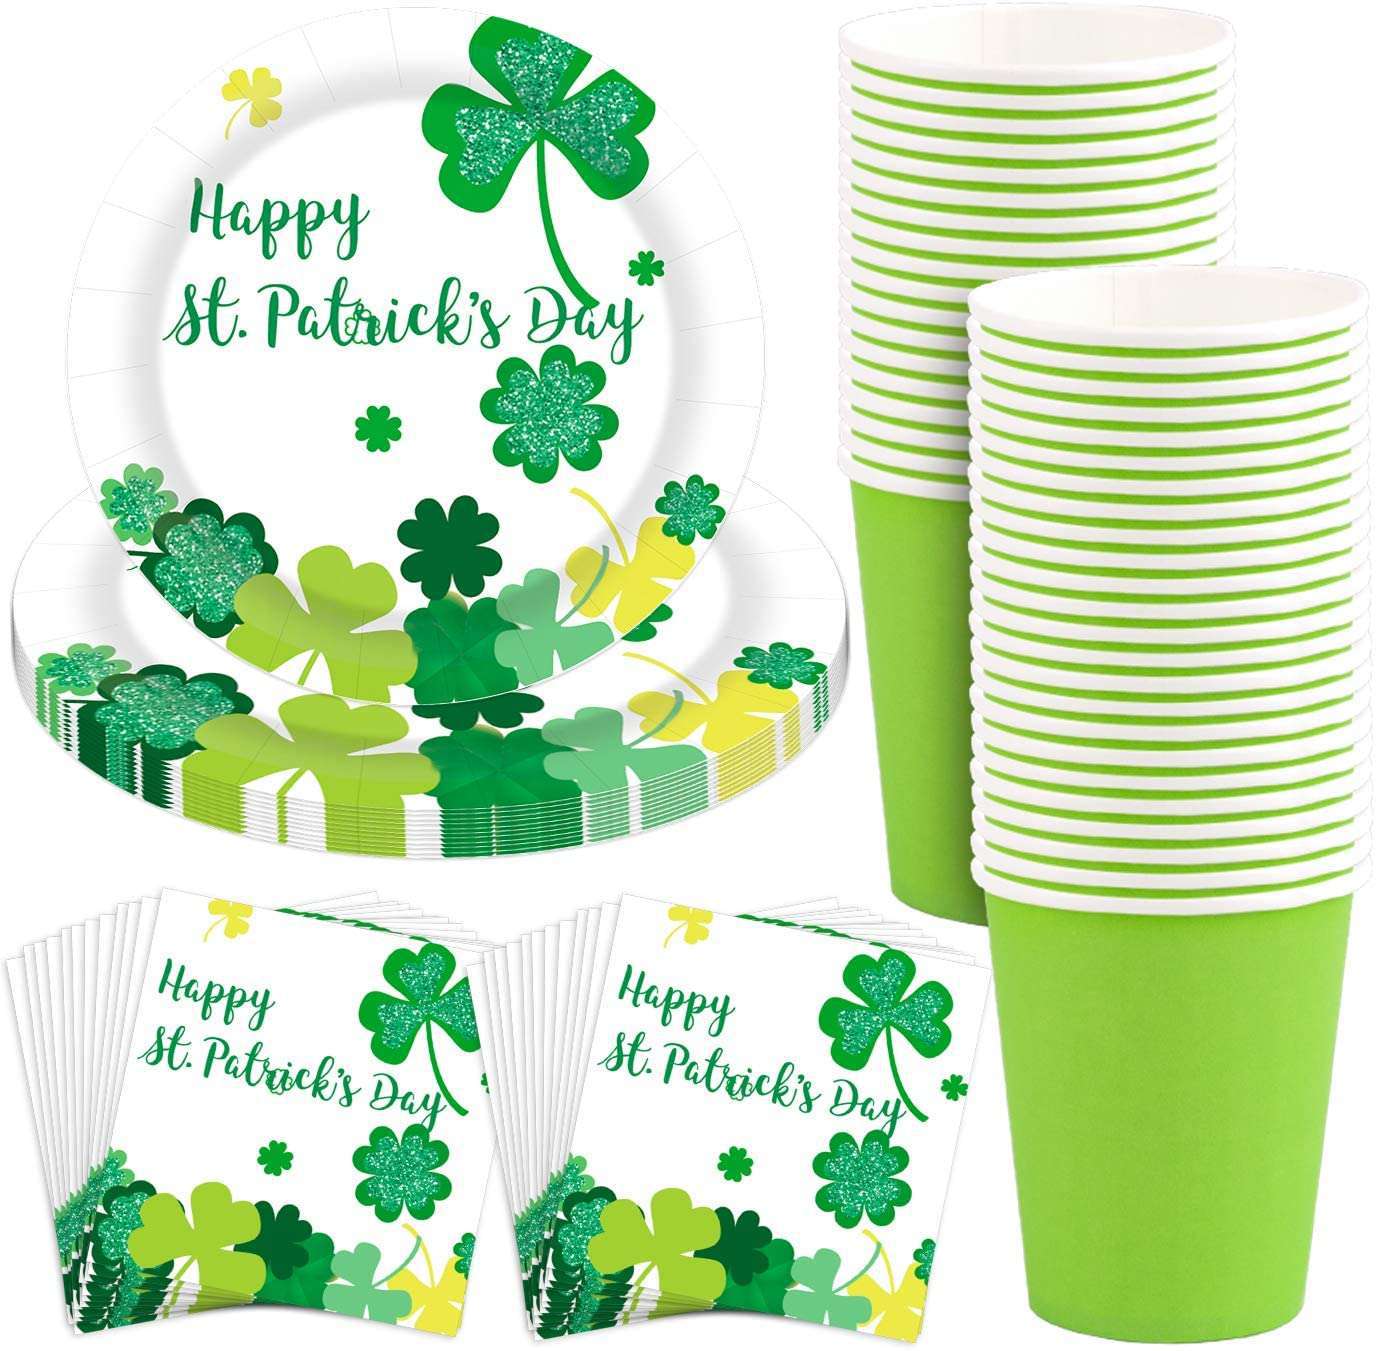 St. Patrick's Day Party Supplies Shamrock Irish Party Supplies Knives Forks Spoons Cups Disposable Cutlery Set